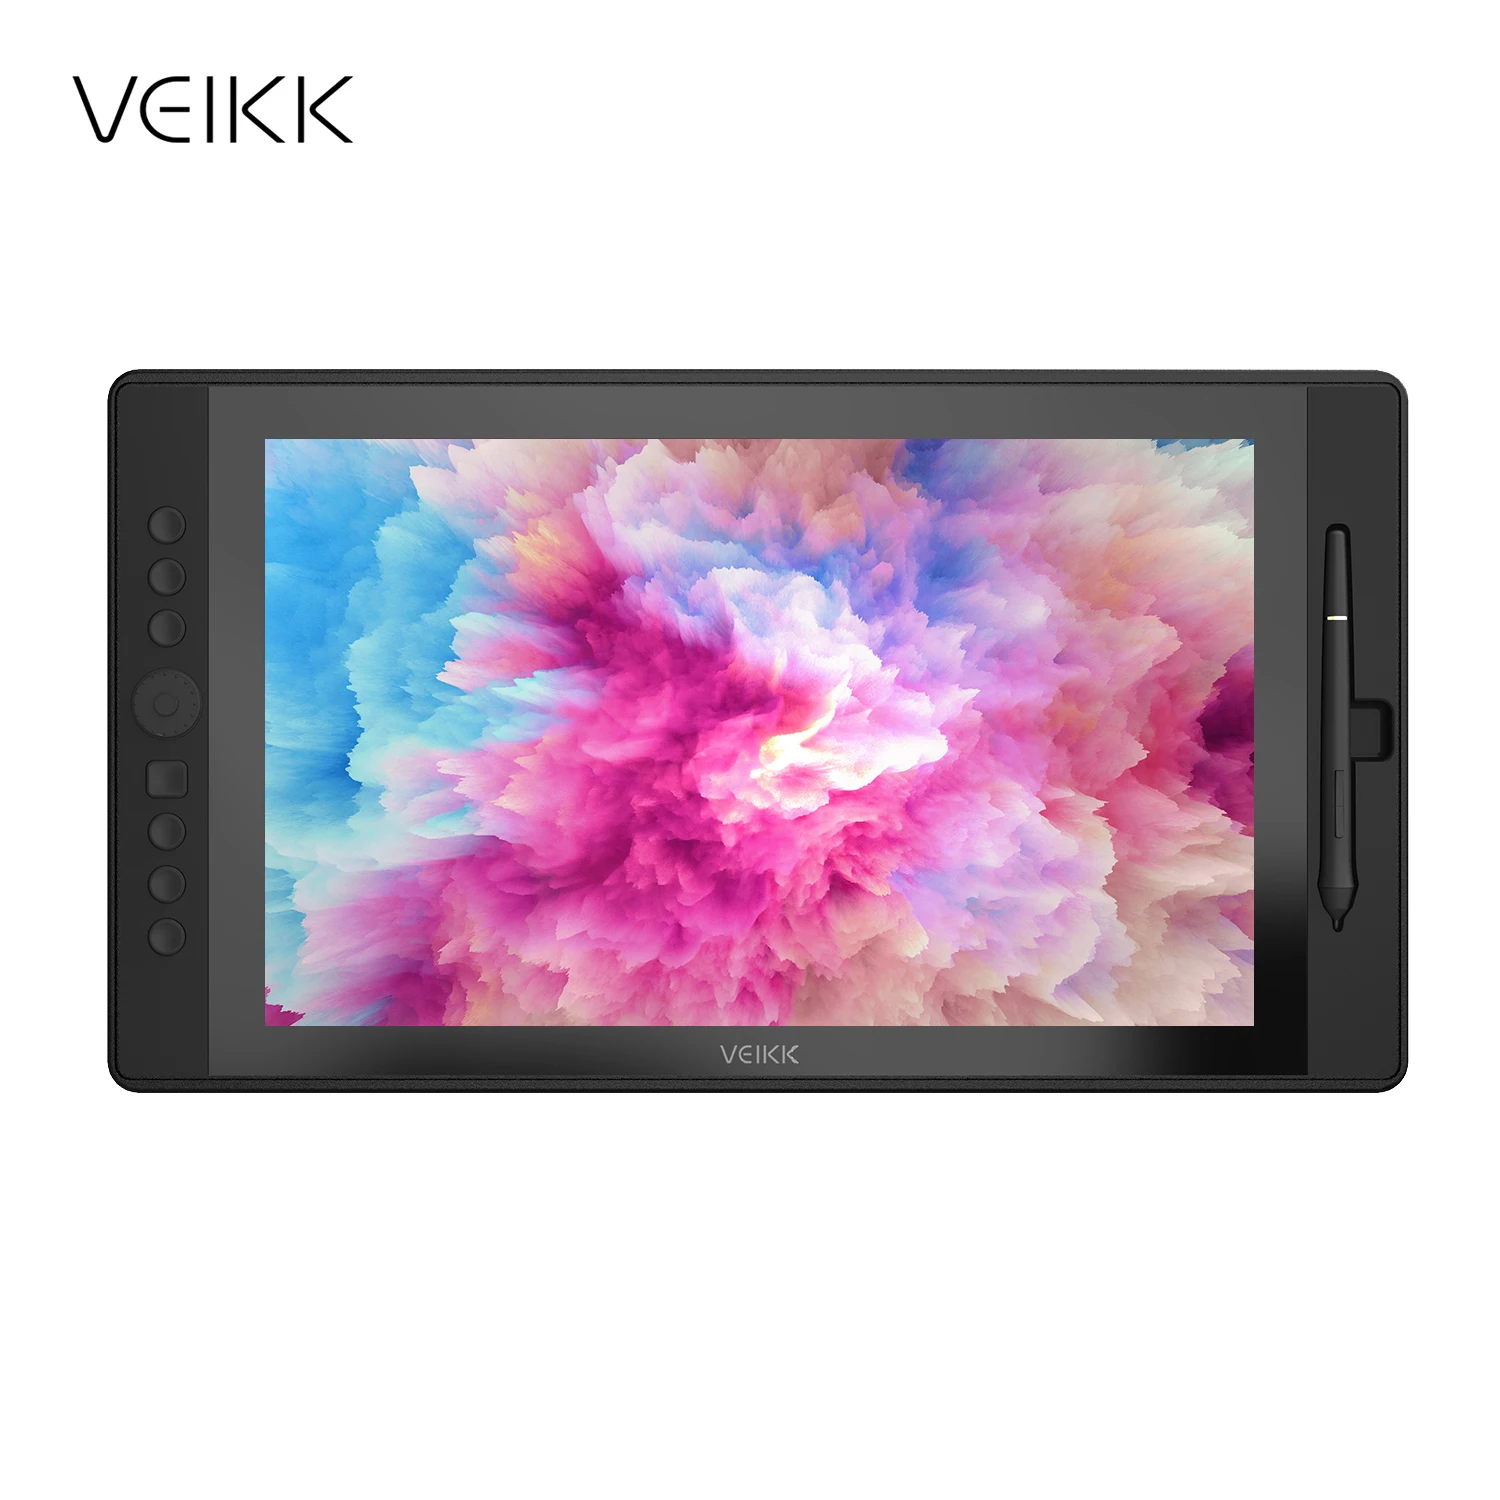 

VEIKK VK1560 15.6 Inches IPS HD Graphics Drawing Tablet Monitor for Painting & Writing with 8192 Levels Battery-free Pen